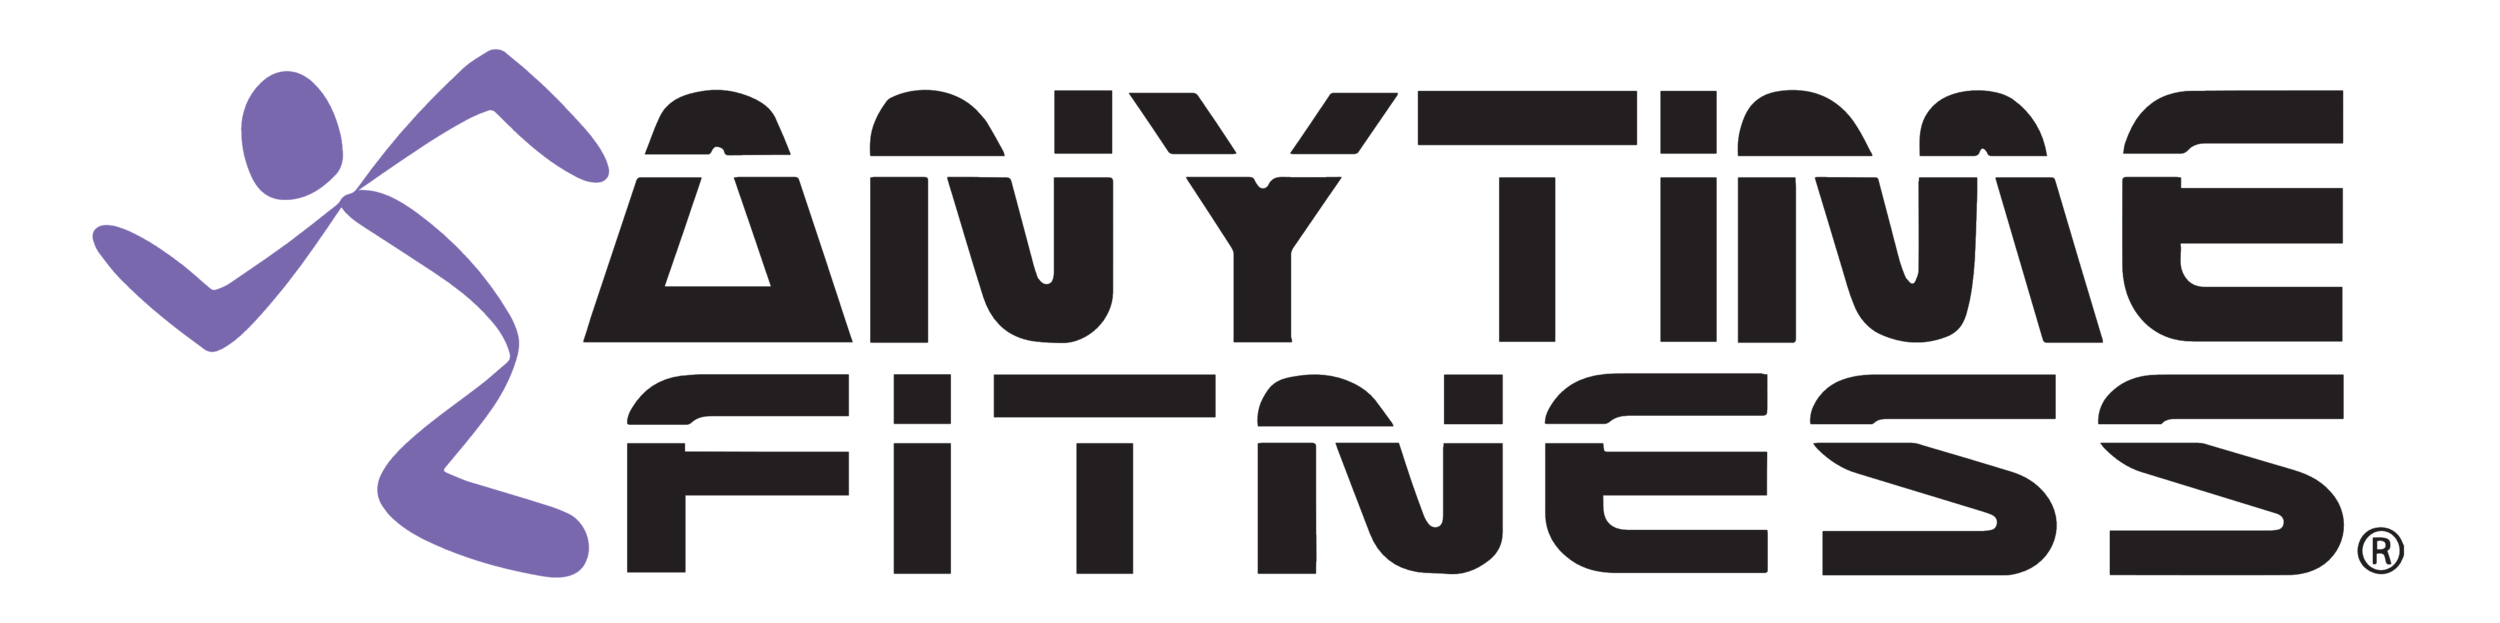 Anytime_Fitness_logo_wordmark.png